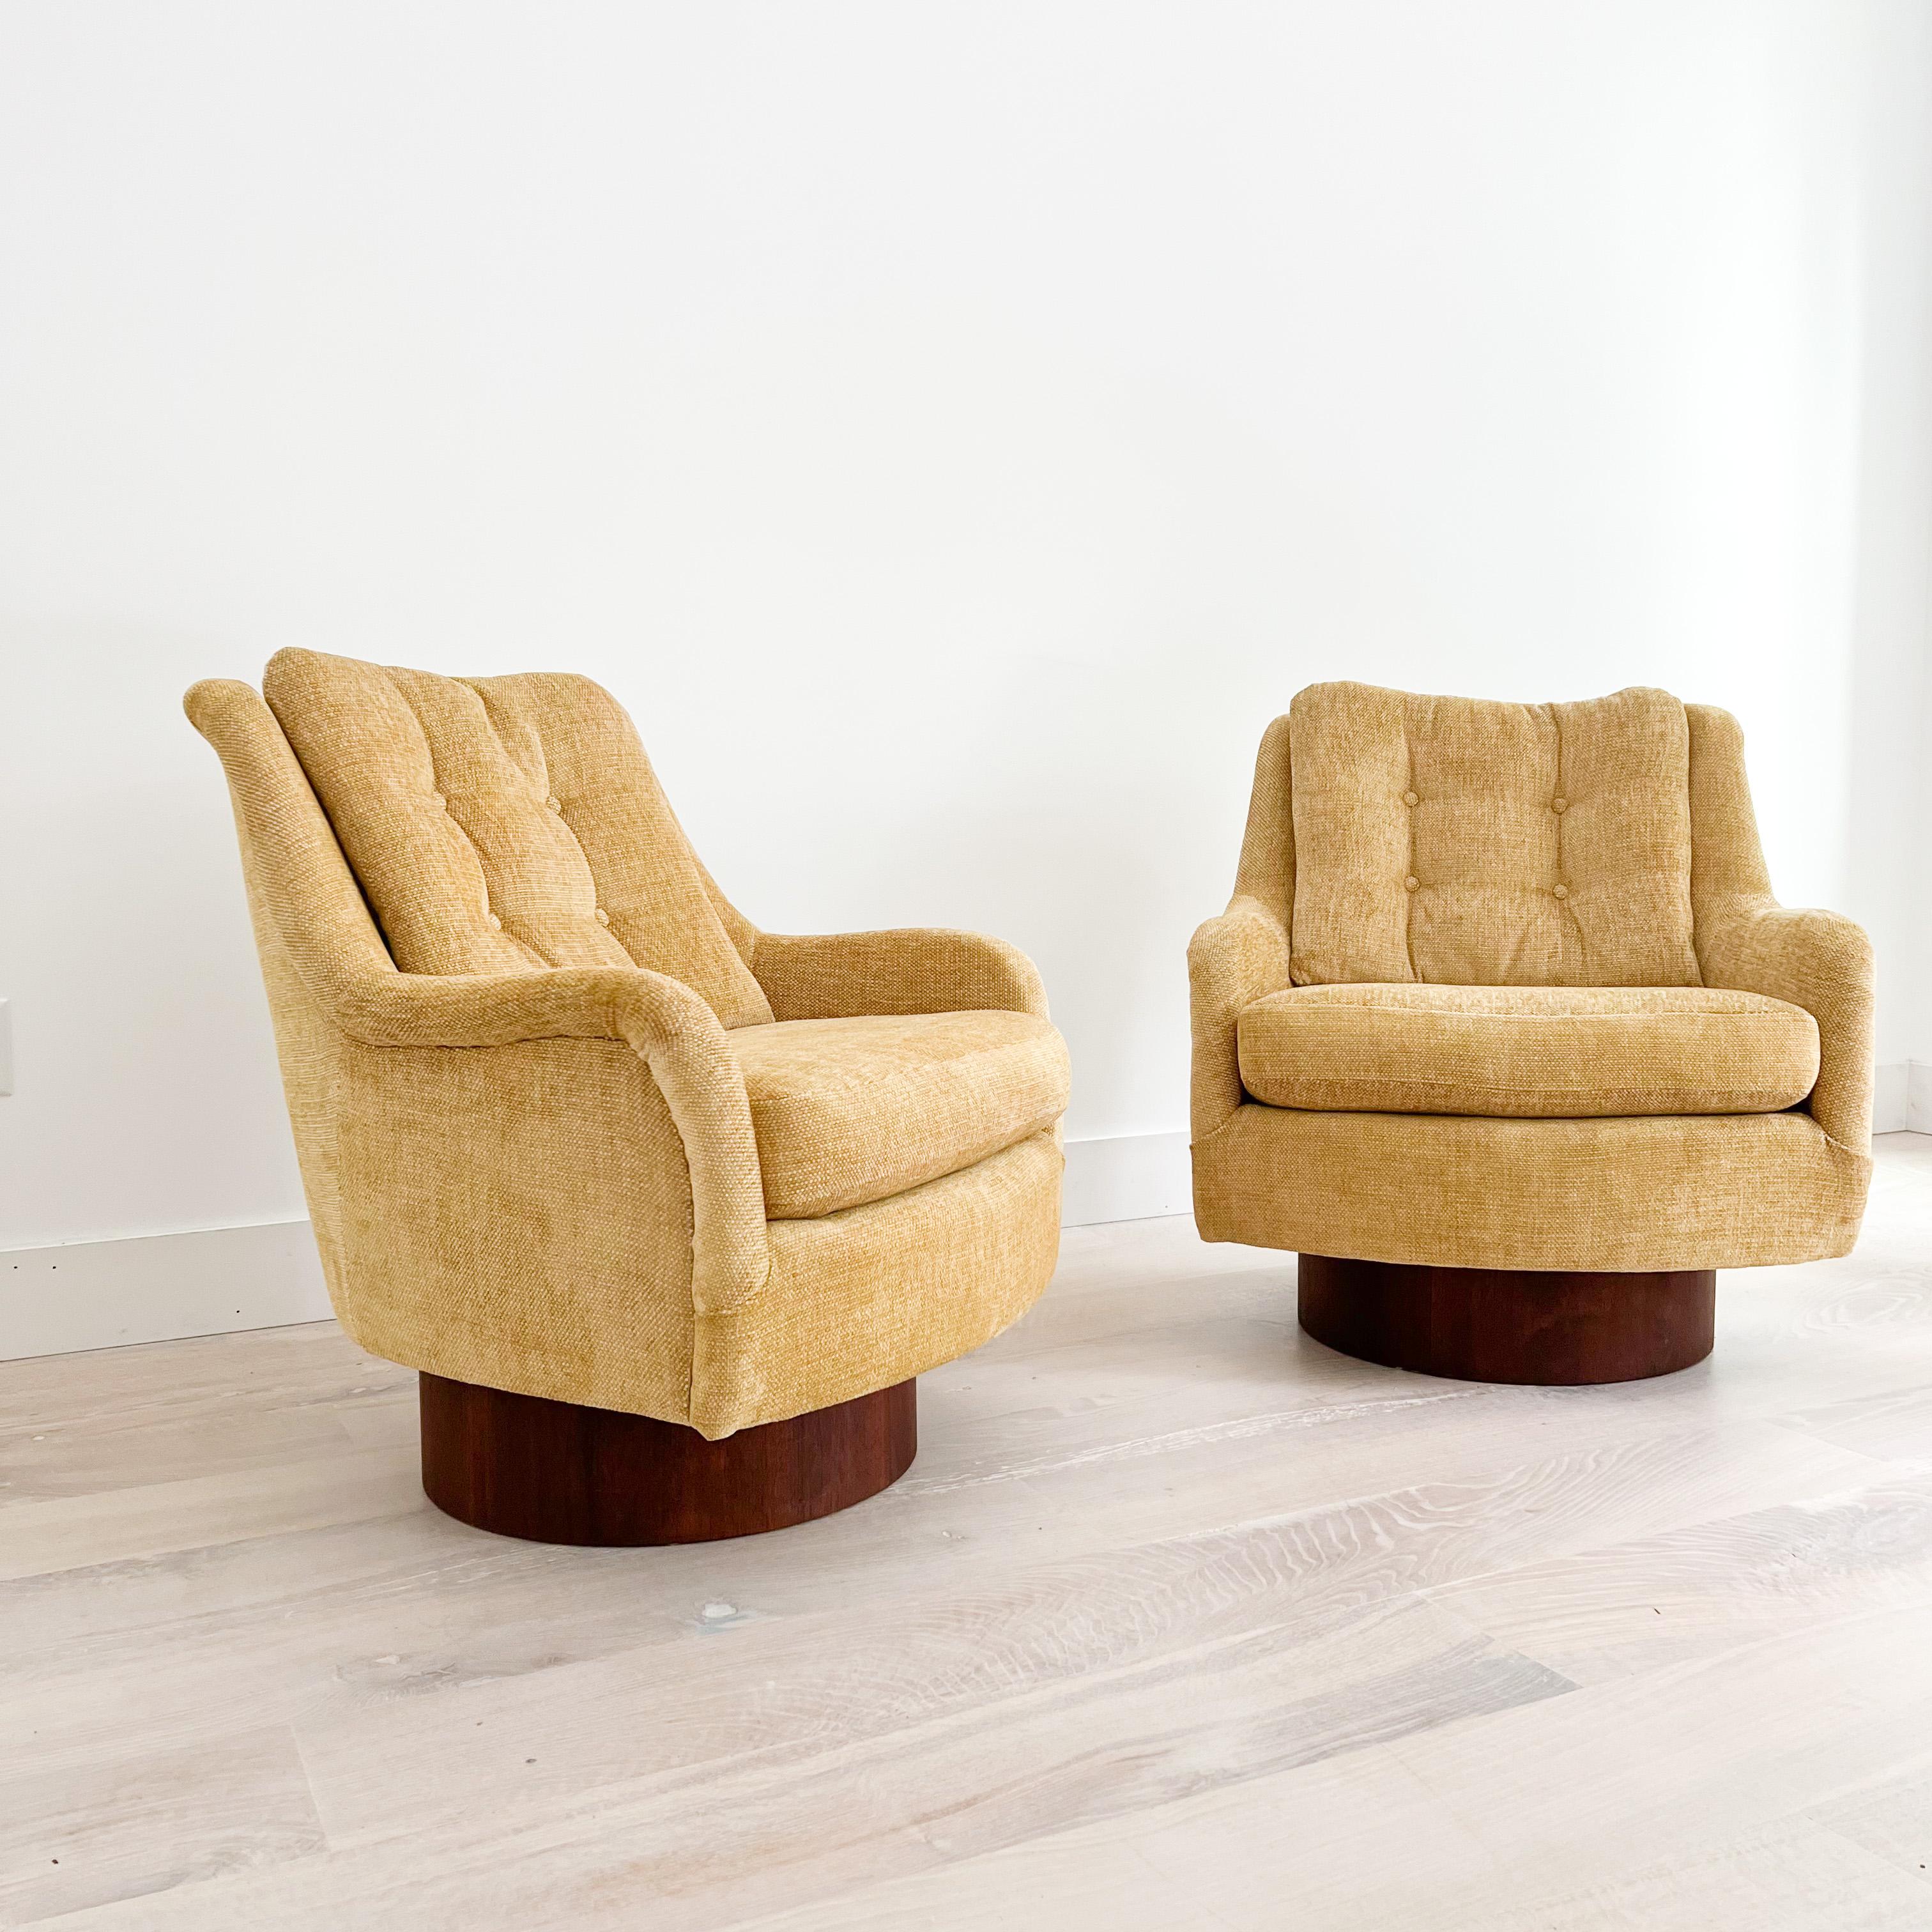 Mid-20th Century Pair of Swivel Rockers w/ New Upholstery, Attributed to Adrian Pearsall